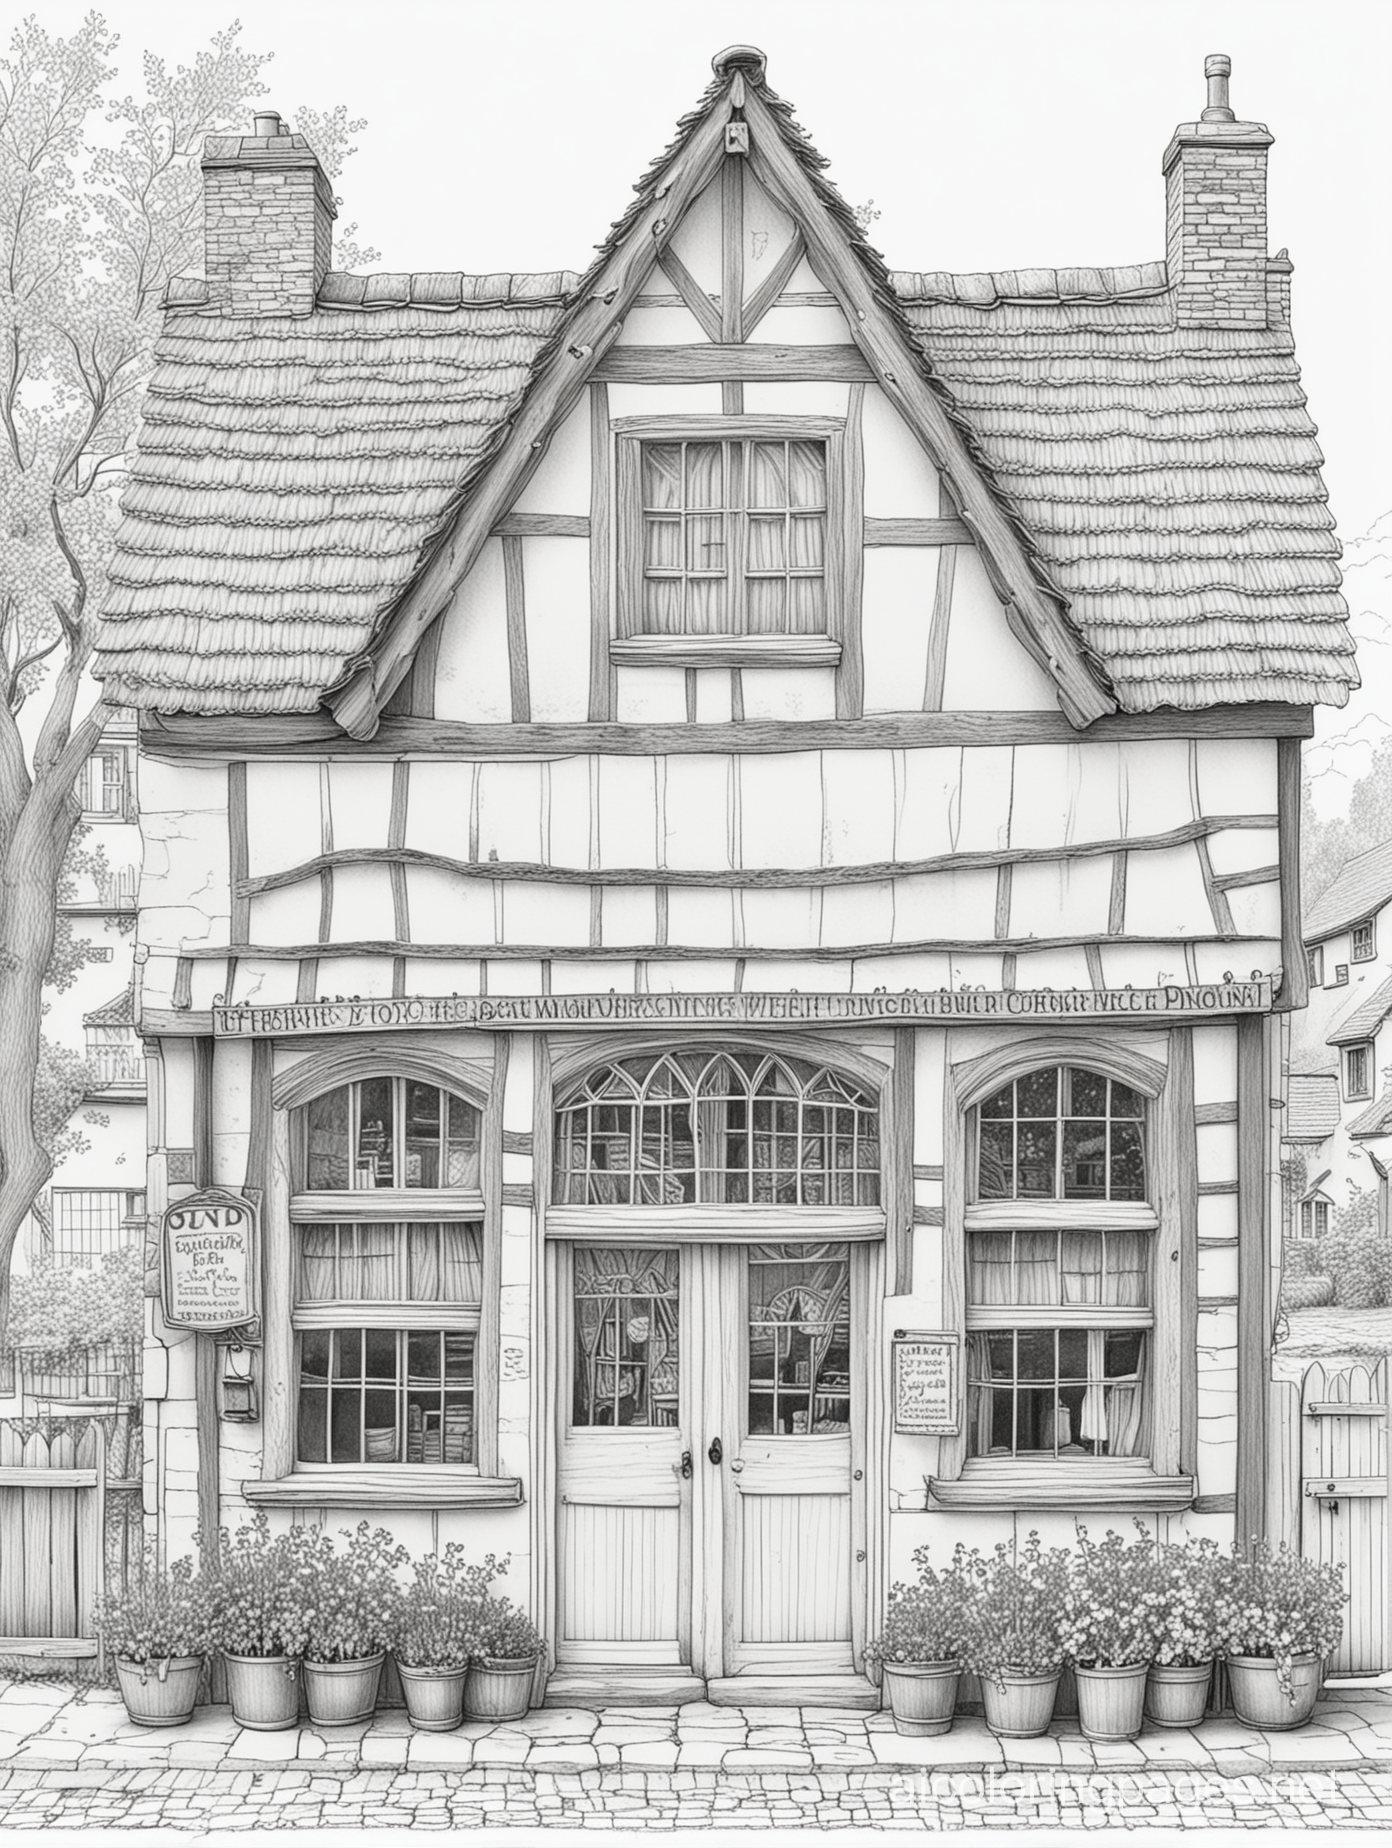 old English village shop
, Coloring Page, black and white, line art, white background, Simplicity, Ample White Space. The background of the coloring page is plain white to make it easy for young children to color within the lines. The outlines of all the subjects are easy to distinguish, making it simple for kids to color without too much difficulty